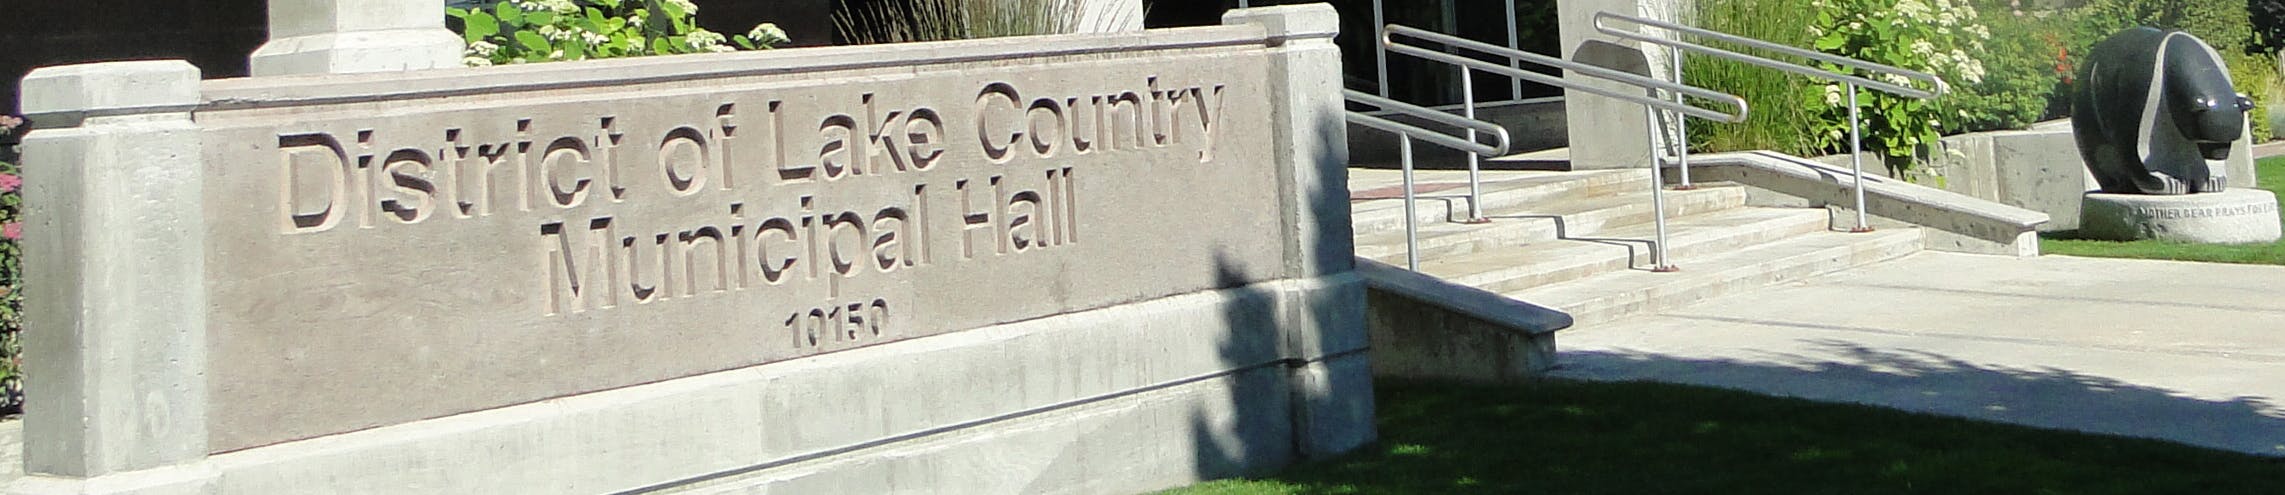 District of Lake Country Council